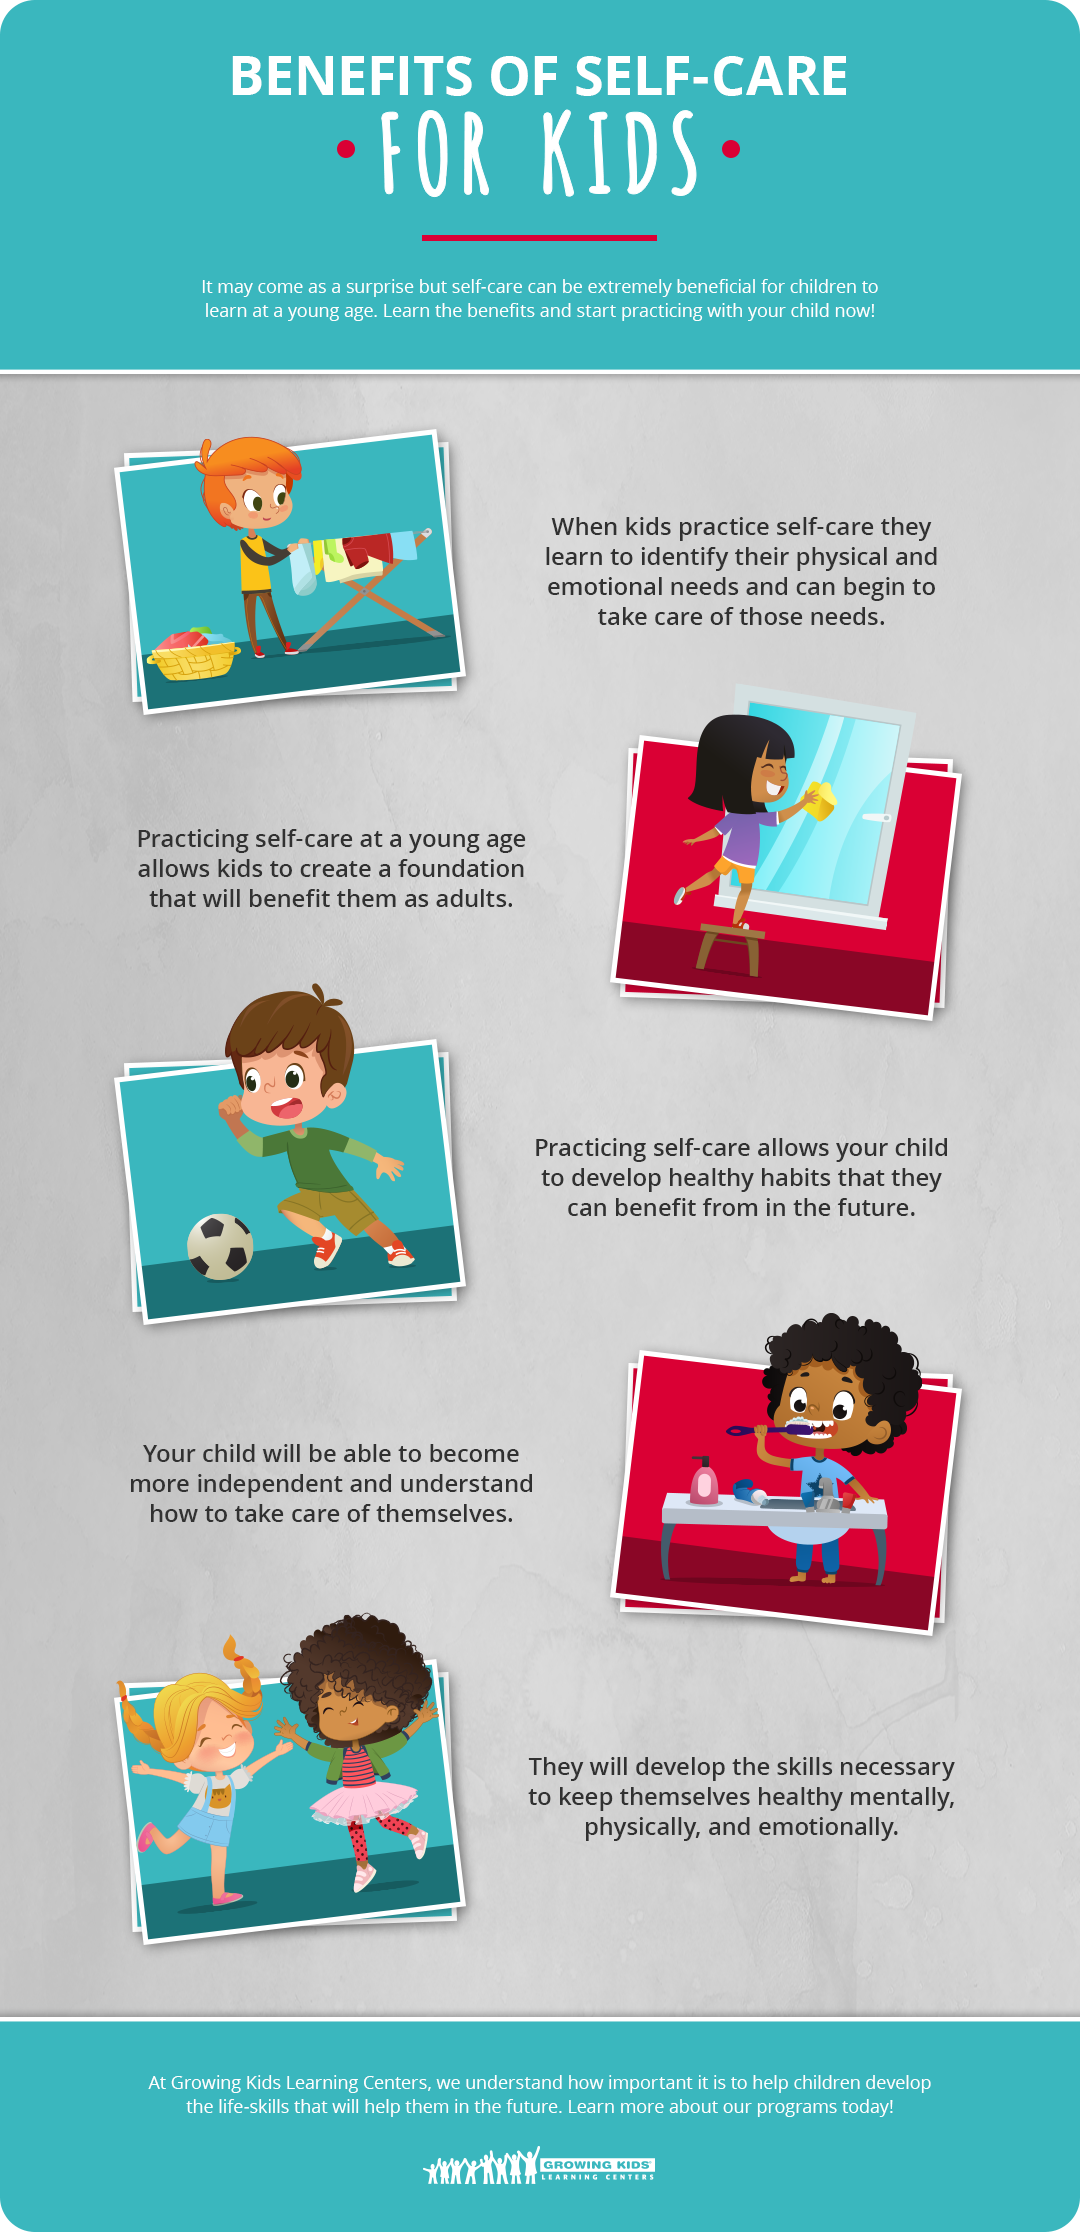 Importance of Play in Early Childhood (9 Benefits & Infographic)